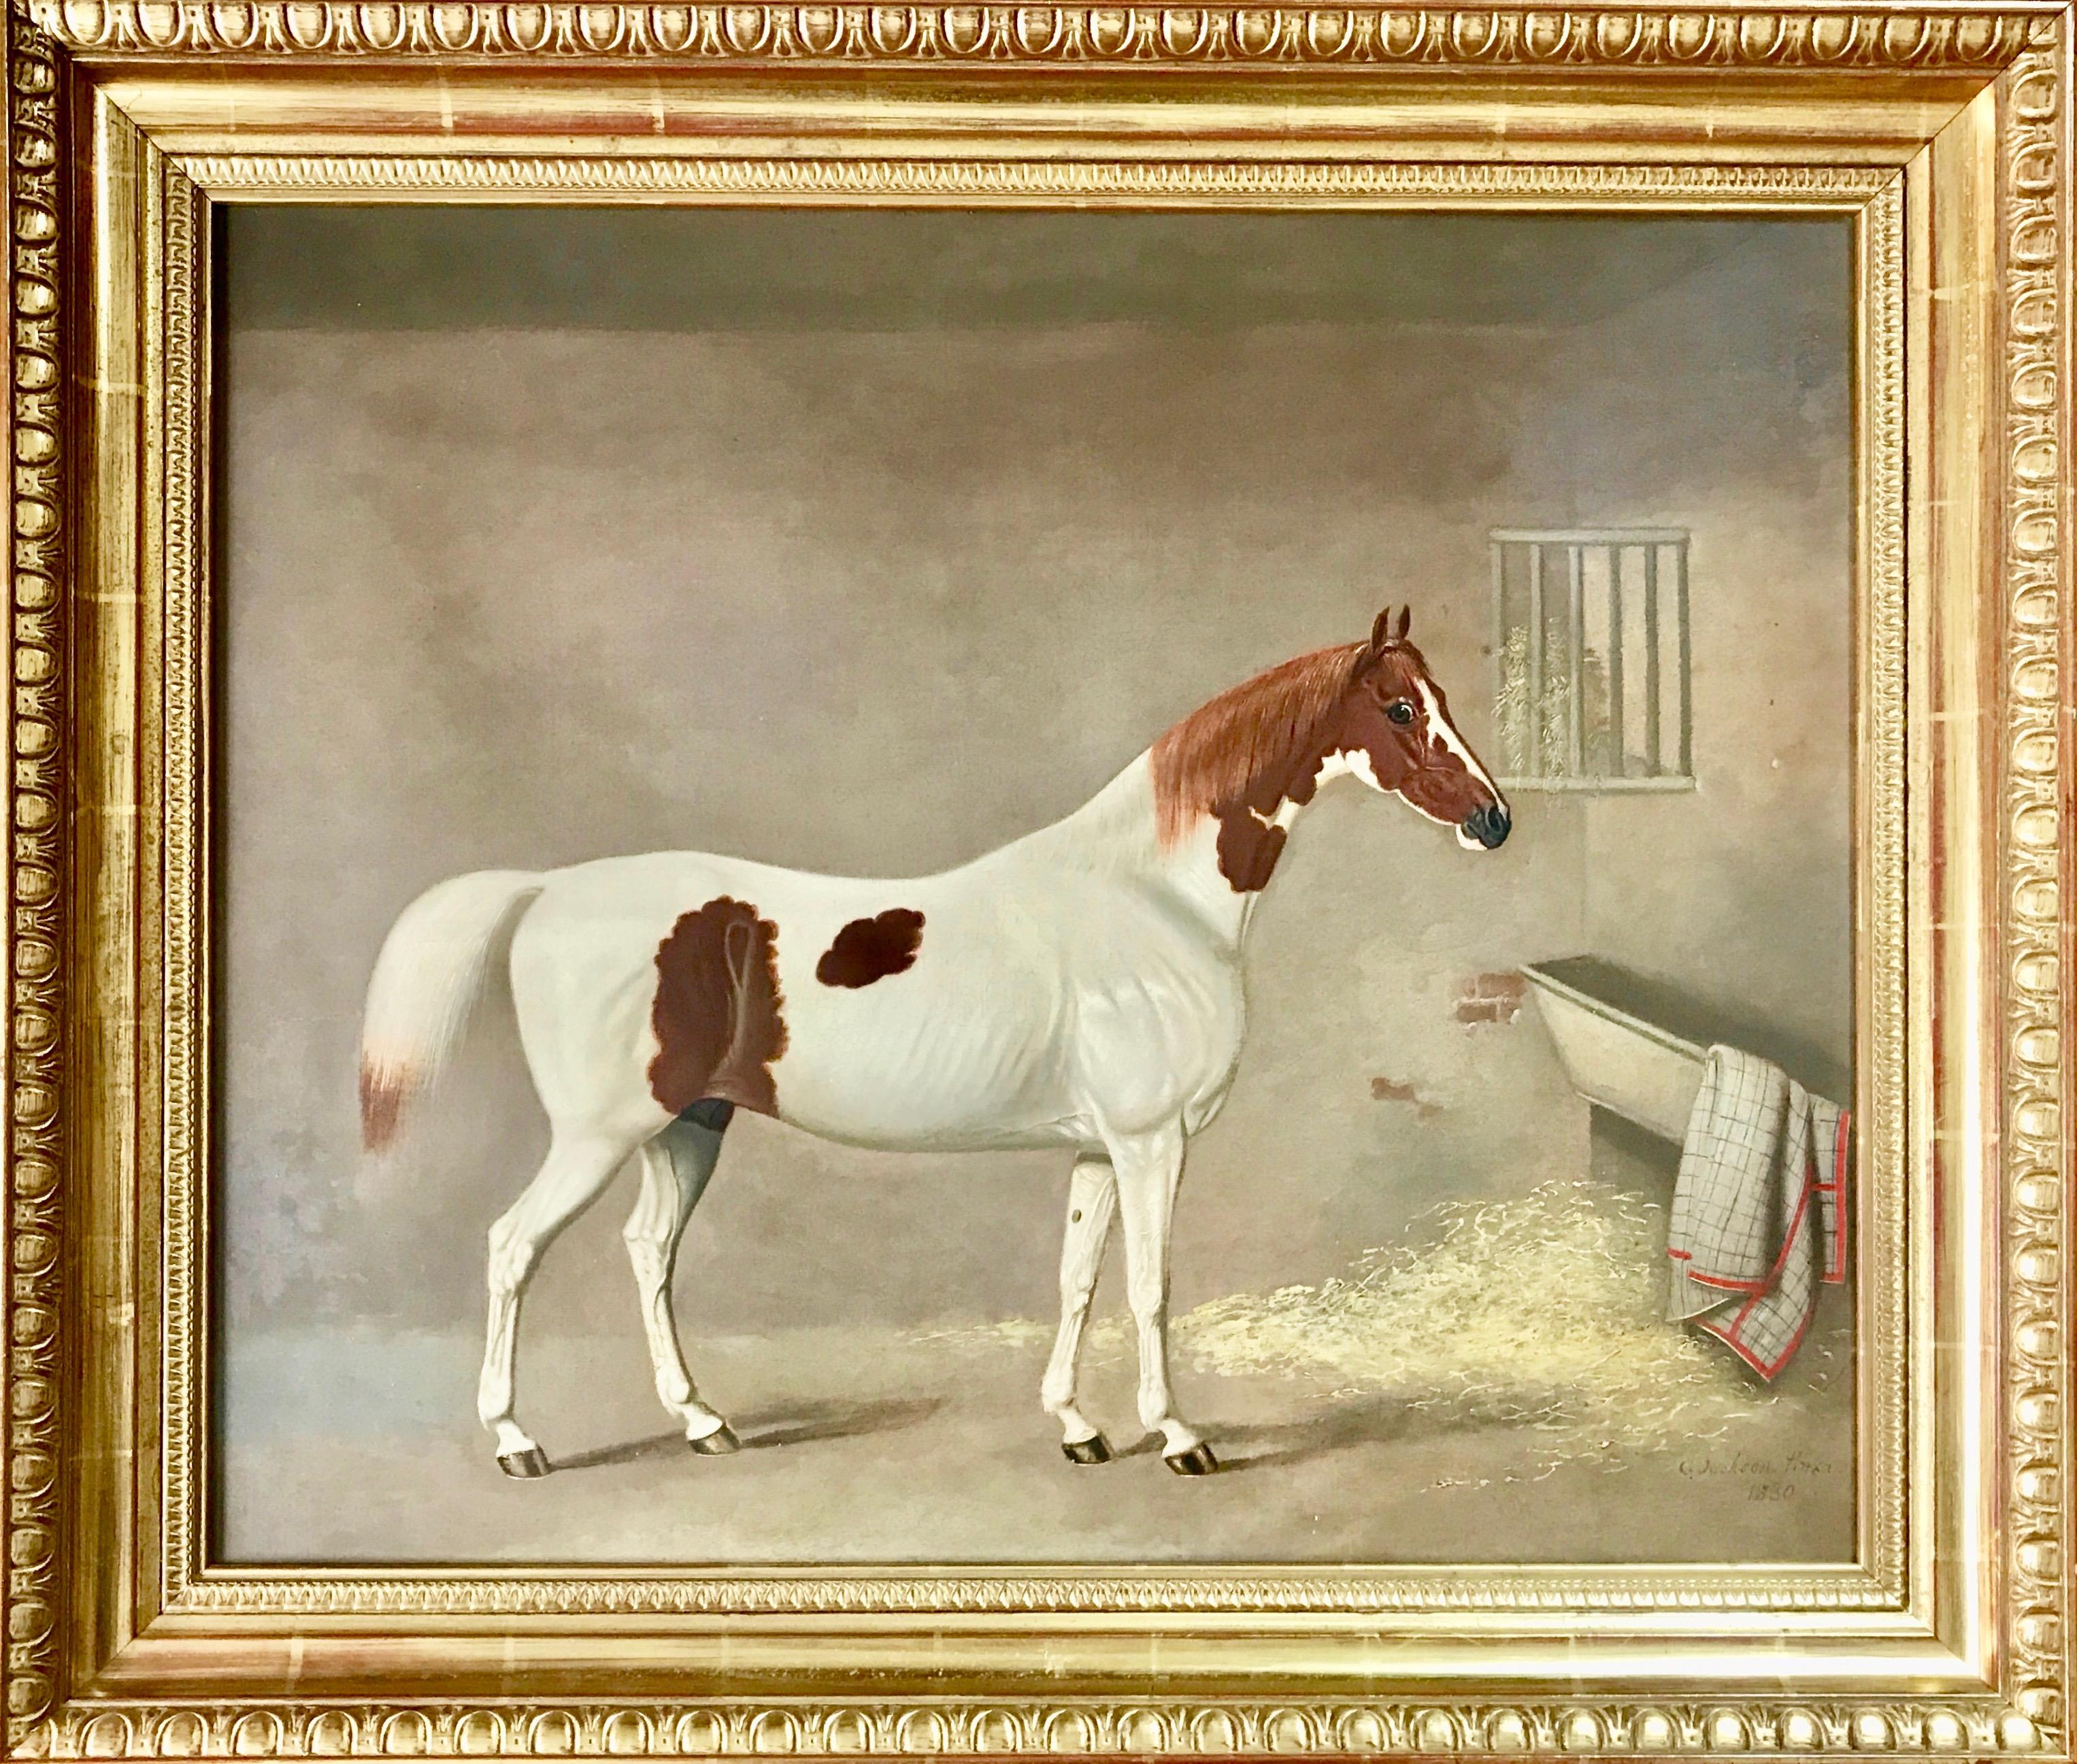 A SKEWBALD HORSE IN A STABLE - BY G. JACKSON.
 
Fine, large, and high quality oil on canvas of a skewbald horse in a stable. Signed G. Jackson. Pinxt and dated 1830 lower right.

A rare example by the celebrated animal painter G. Jackson, who was an